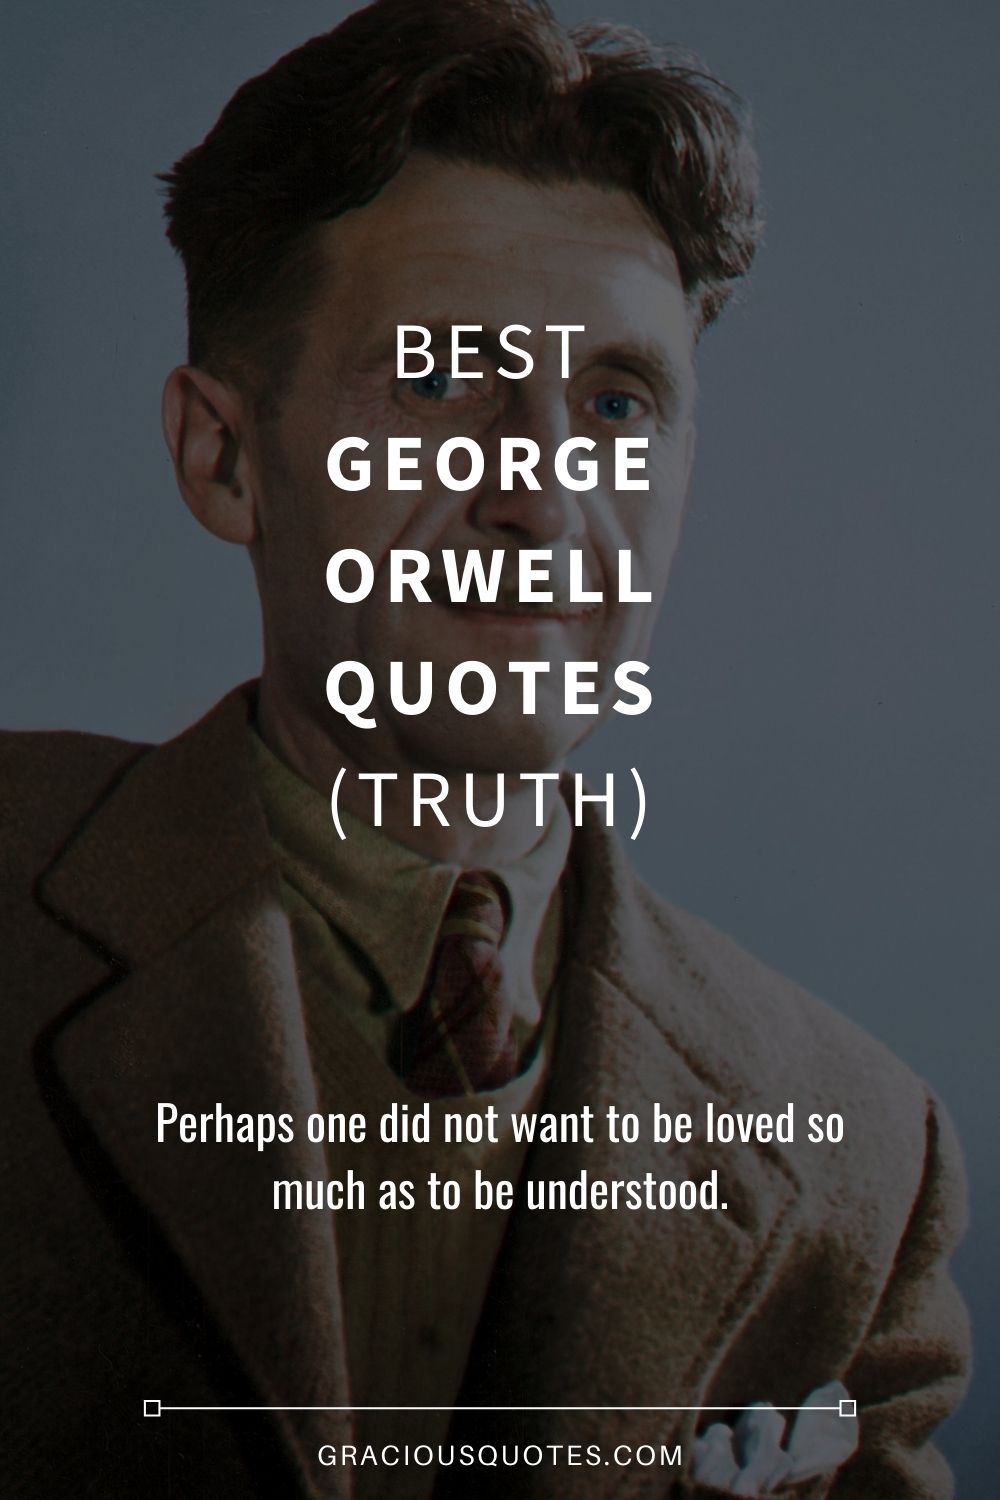 Best George Orwell Quotes (TRUTH) - Gracious Quotes